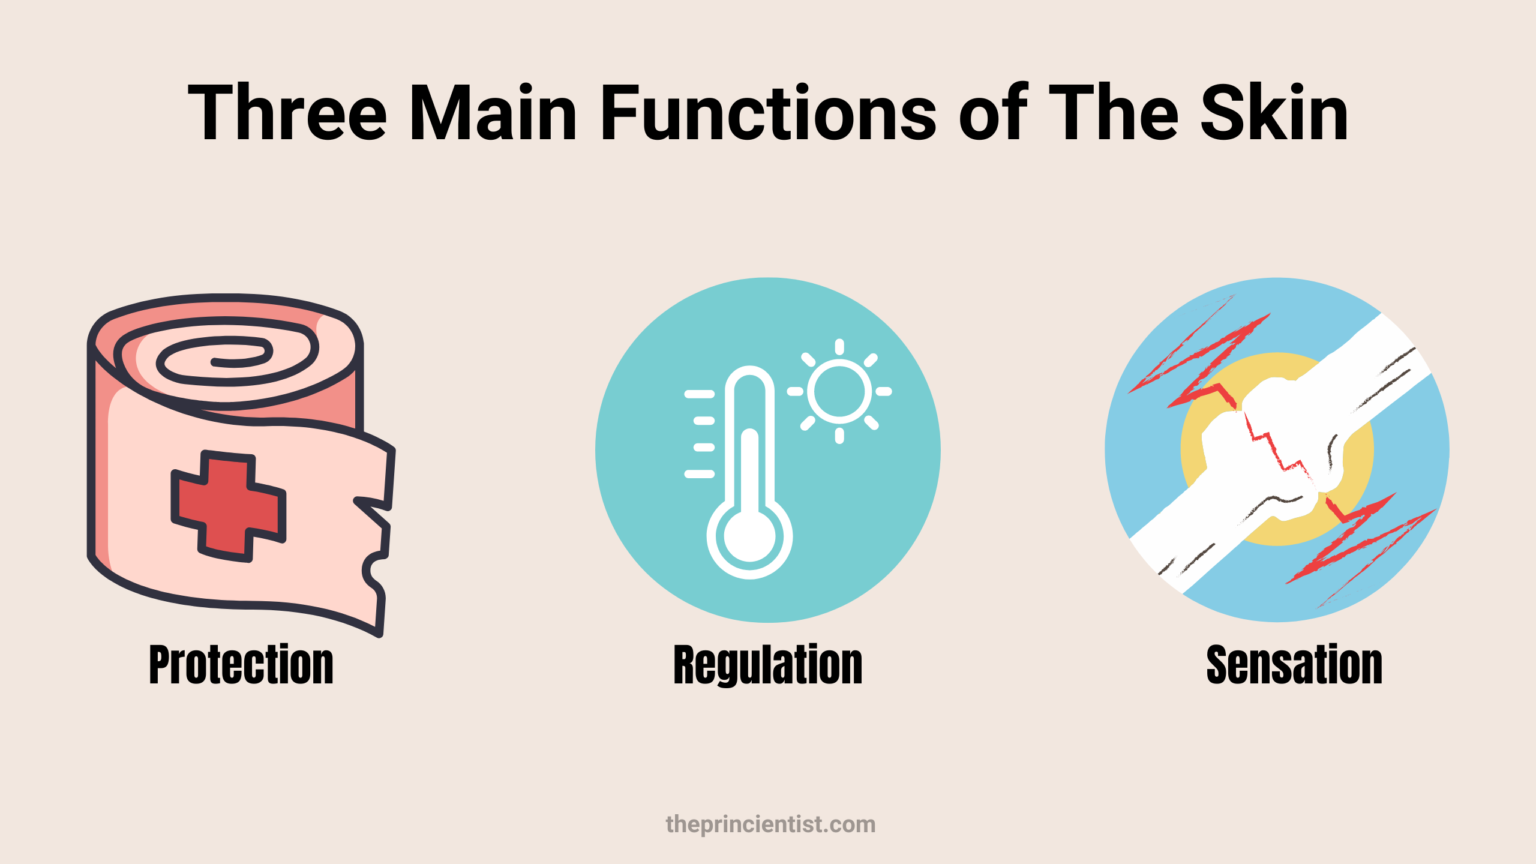 representataive figures of the three main functions of the skin: protection, reguation and sensation